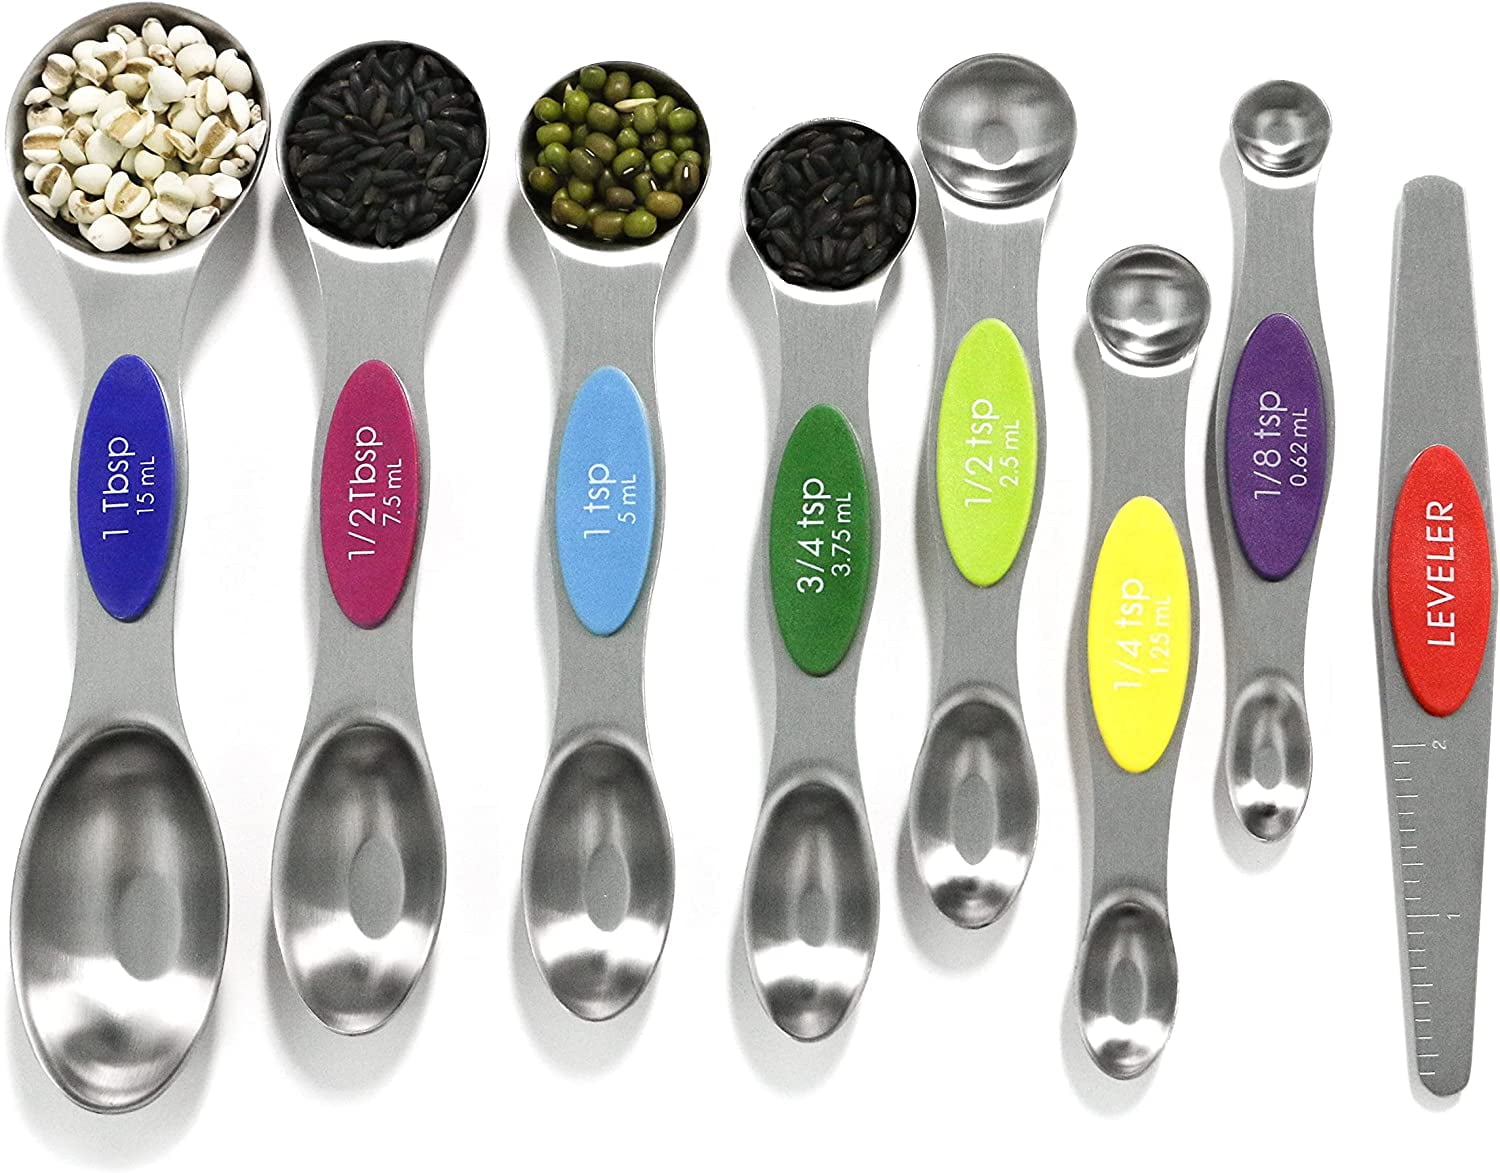  Measuring Cups and Magnetic Measuring Spoons Set, Wildone Stainless  Steel 16 Piece Set, 8 Measuring Cups & 7 Double Sided Stackable Magnetic Measuring  Spoons & 1 Leveler: Home & Kitchen